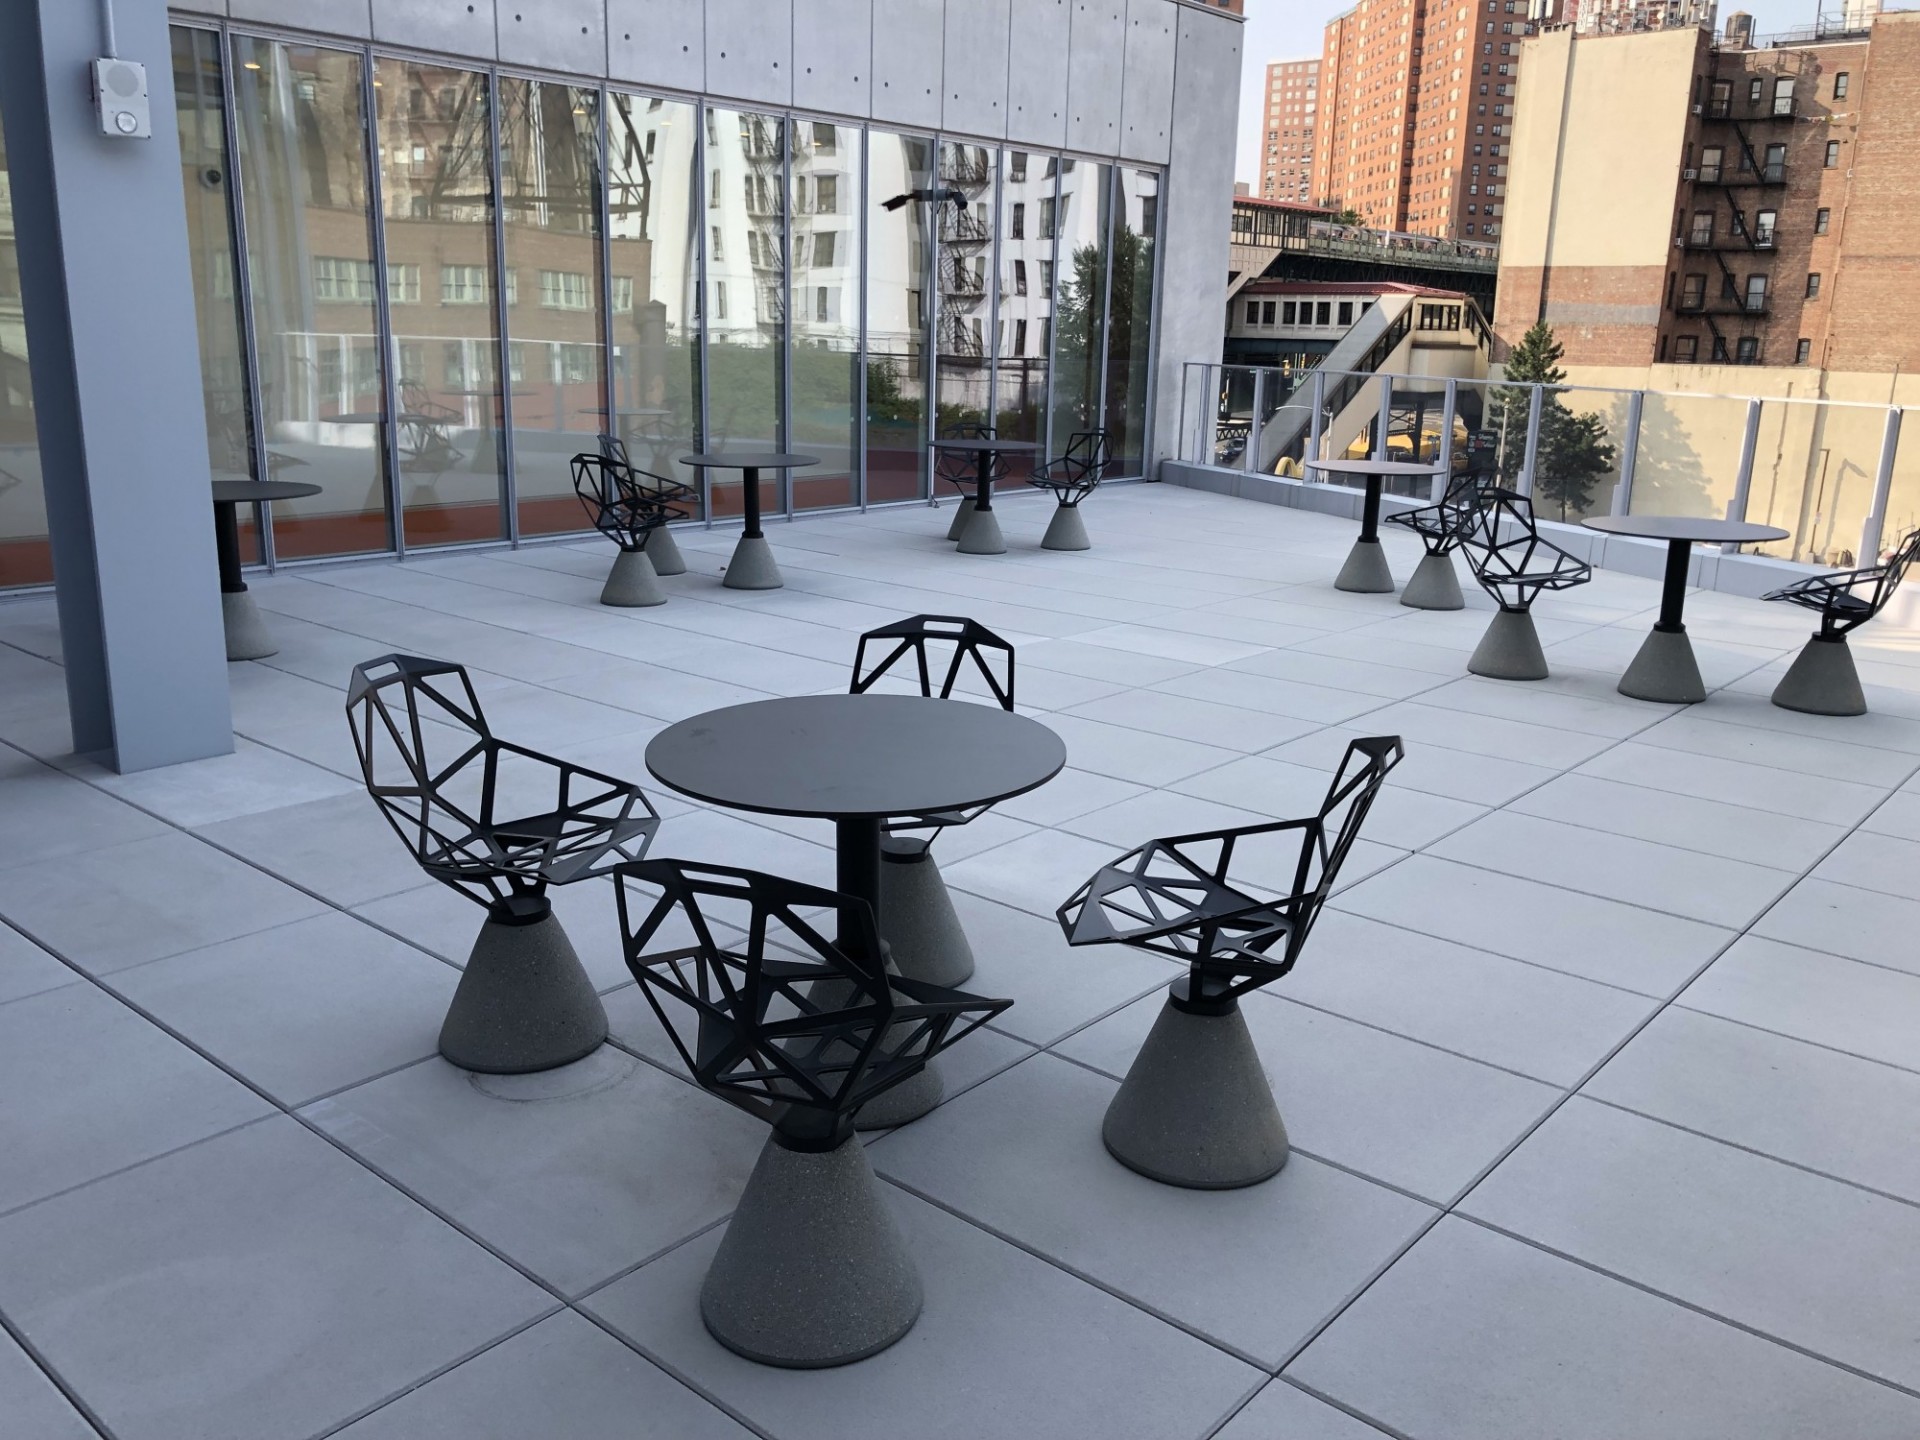 Terrace with weather proof tables and chairs in café style formation 